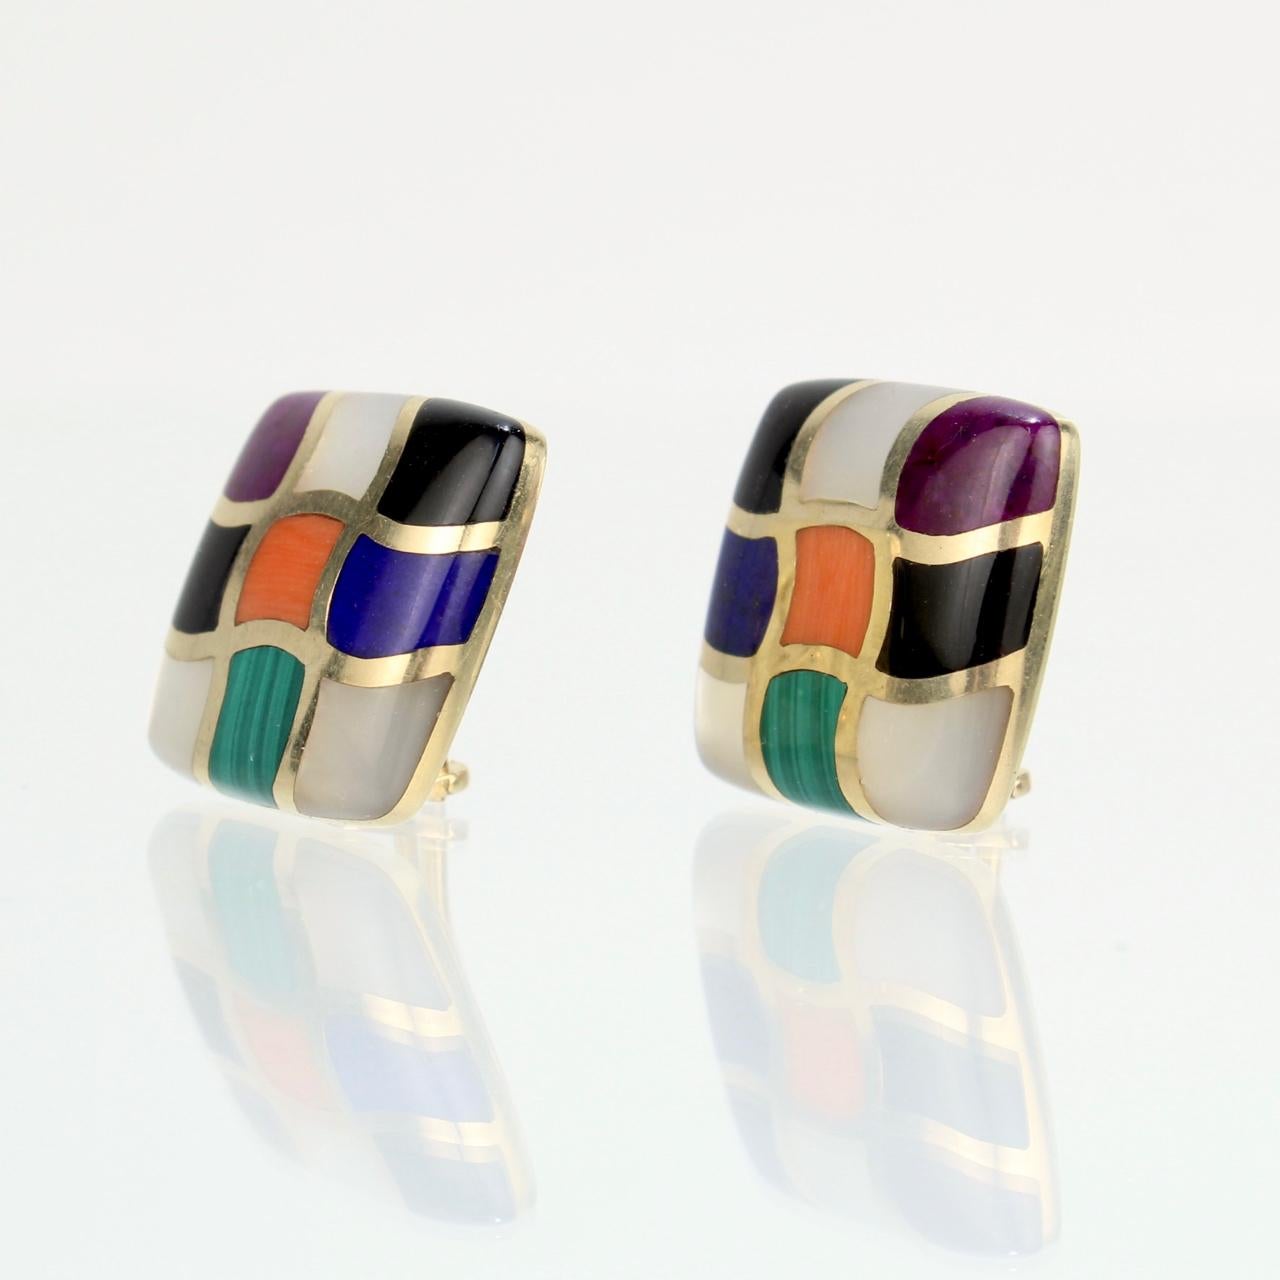 A wonderful pair of signed clip-on earrings. 

By Asch Grossbardt.

In 14k yellow gold. 

Each inlaid with lapis, coral, mother-of-pearl, onyx, and malachite and square-shaped with rounded corners.

Condition:
They are in overall good, as-pictured,